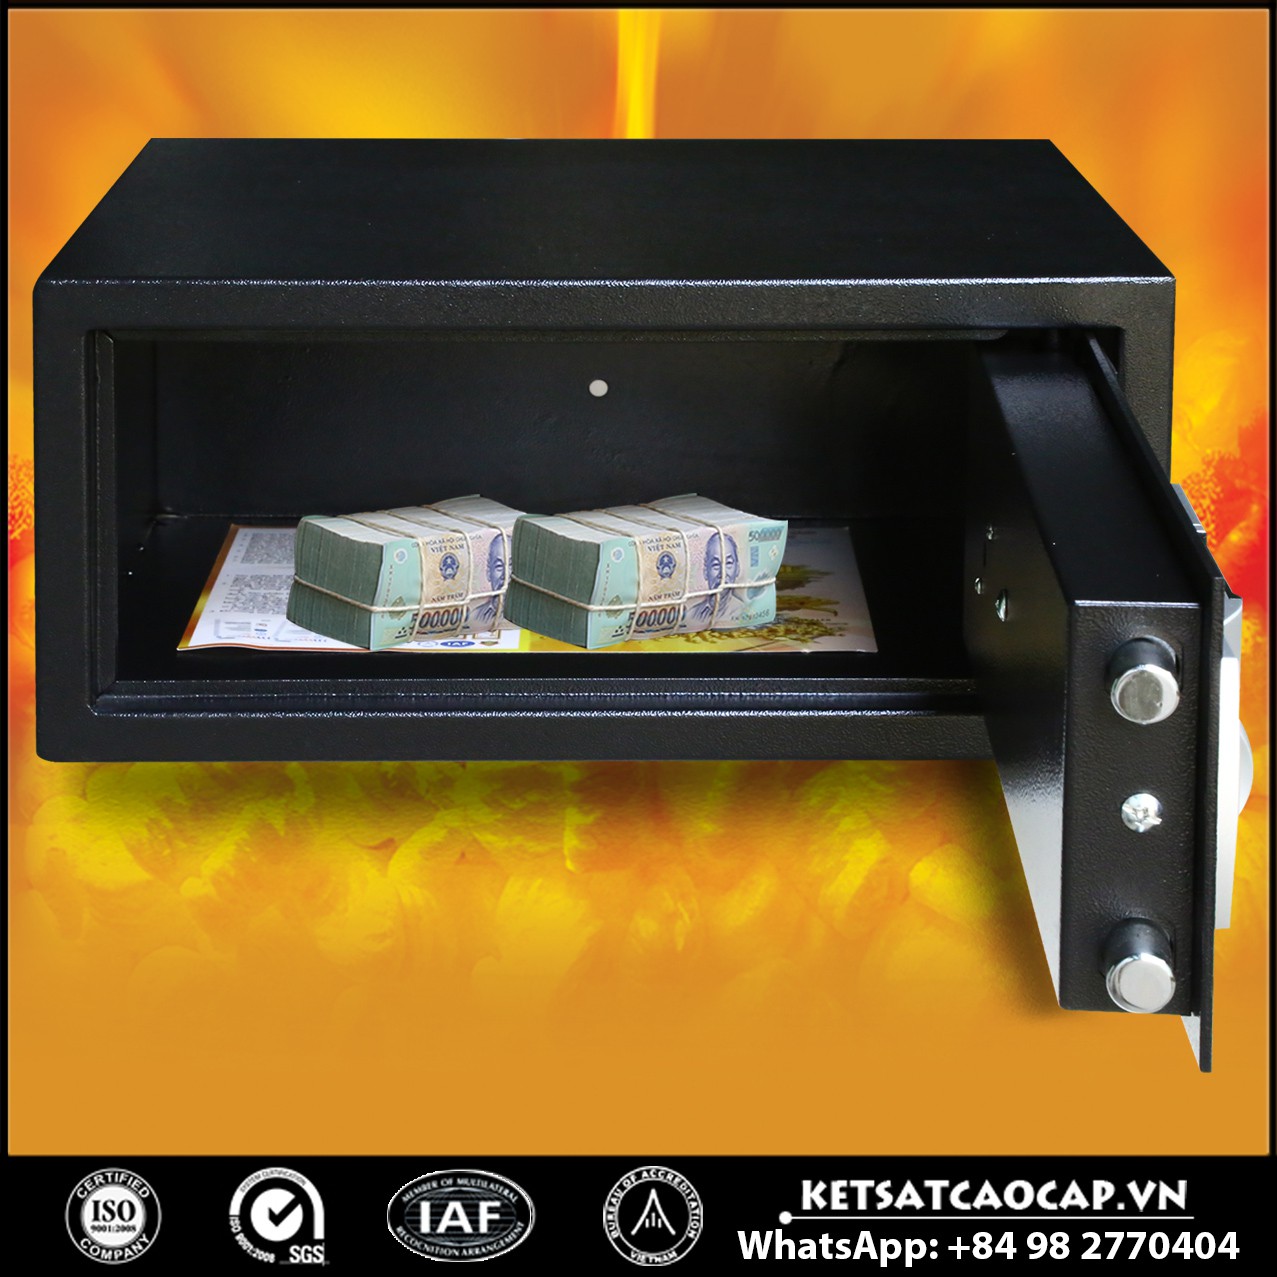 Portable Hotel Safes Manufacturers & Suppliers‎